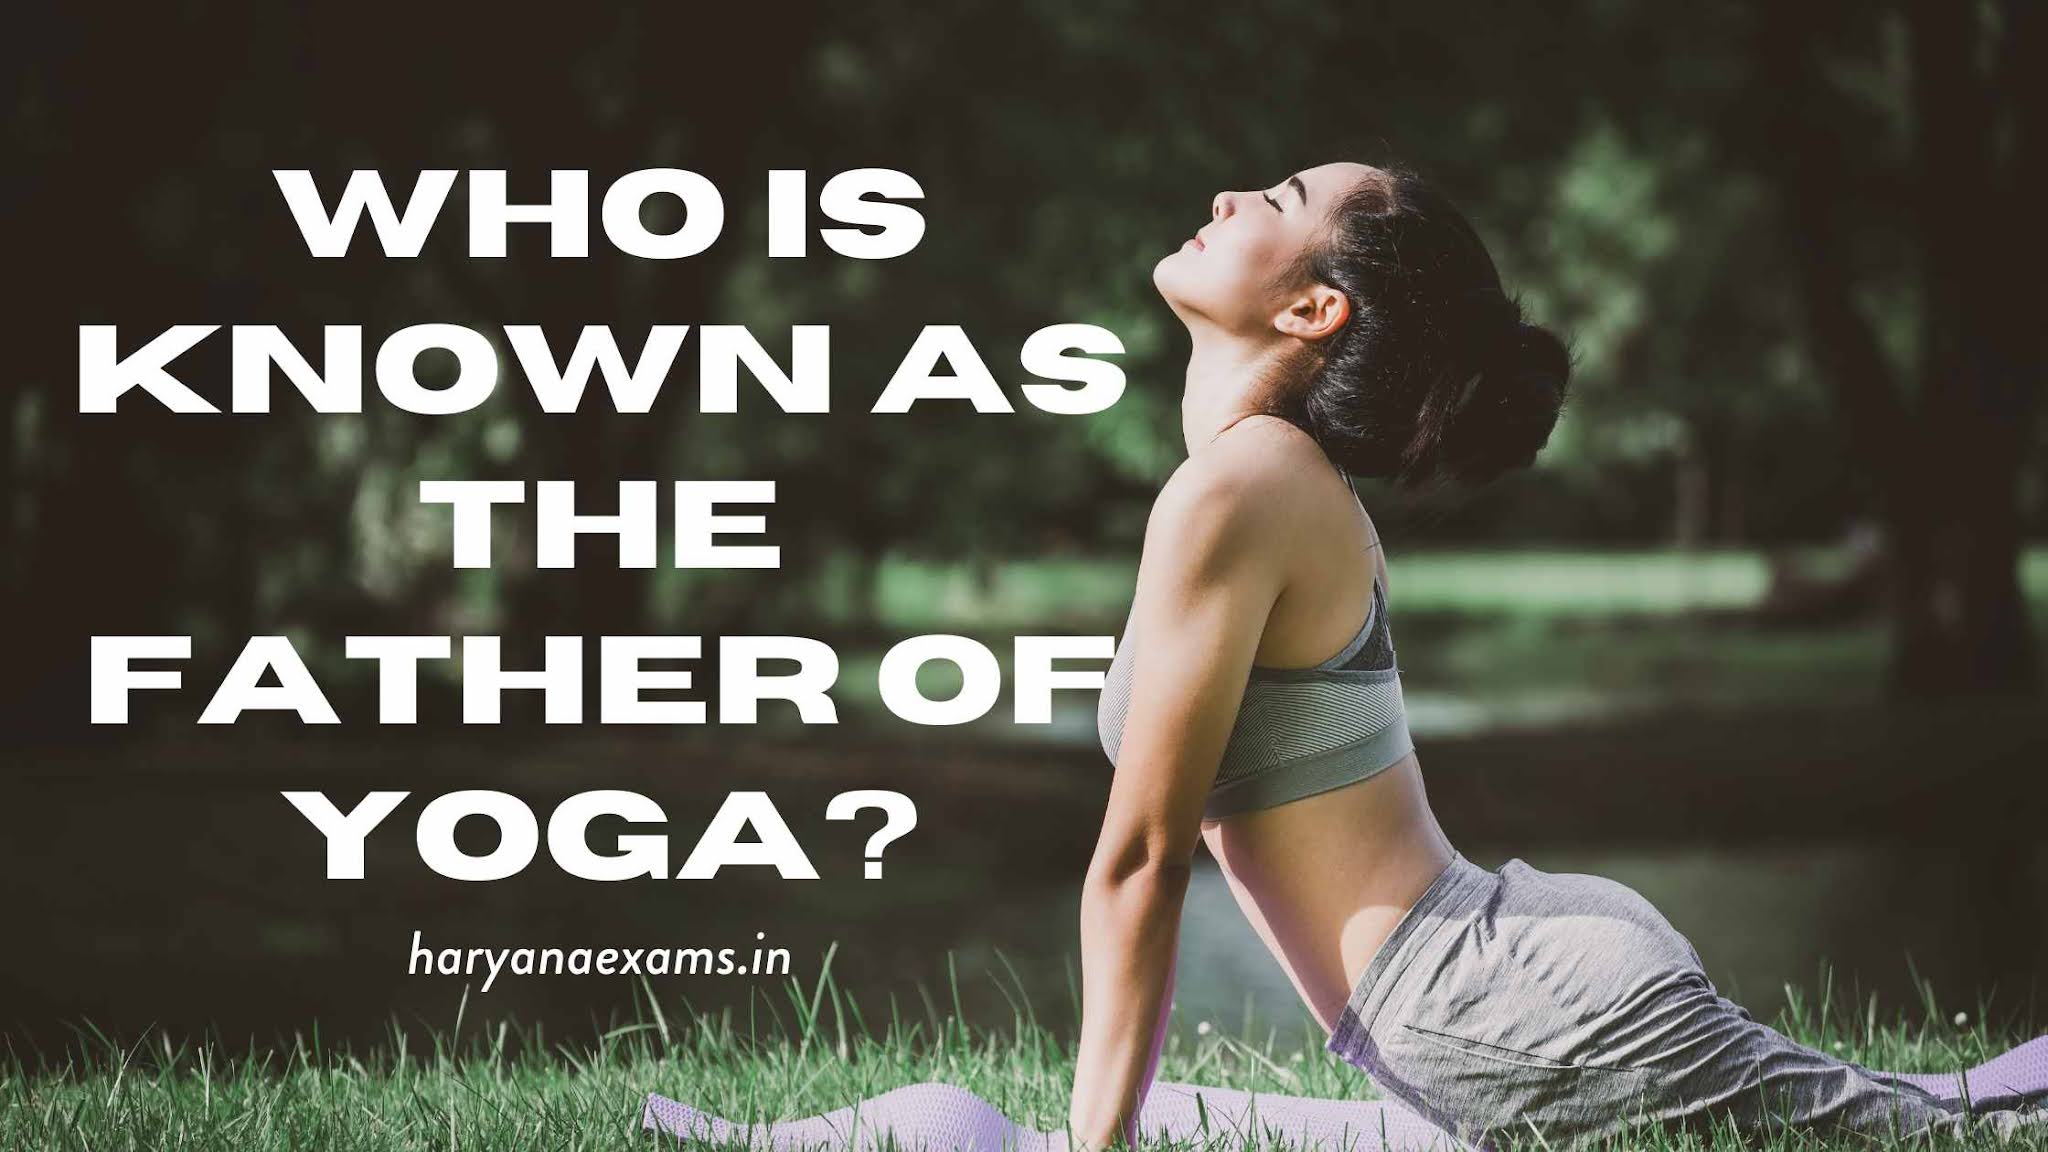 Who is known as the father of yoga?